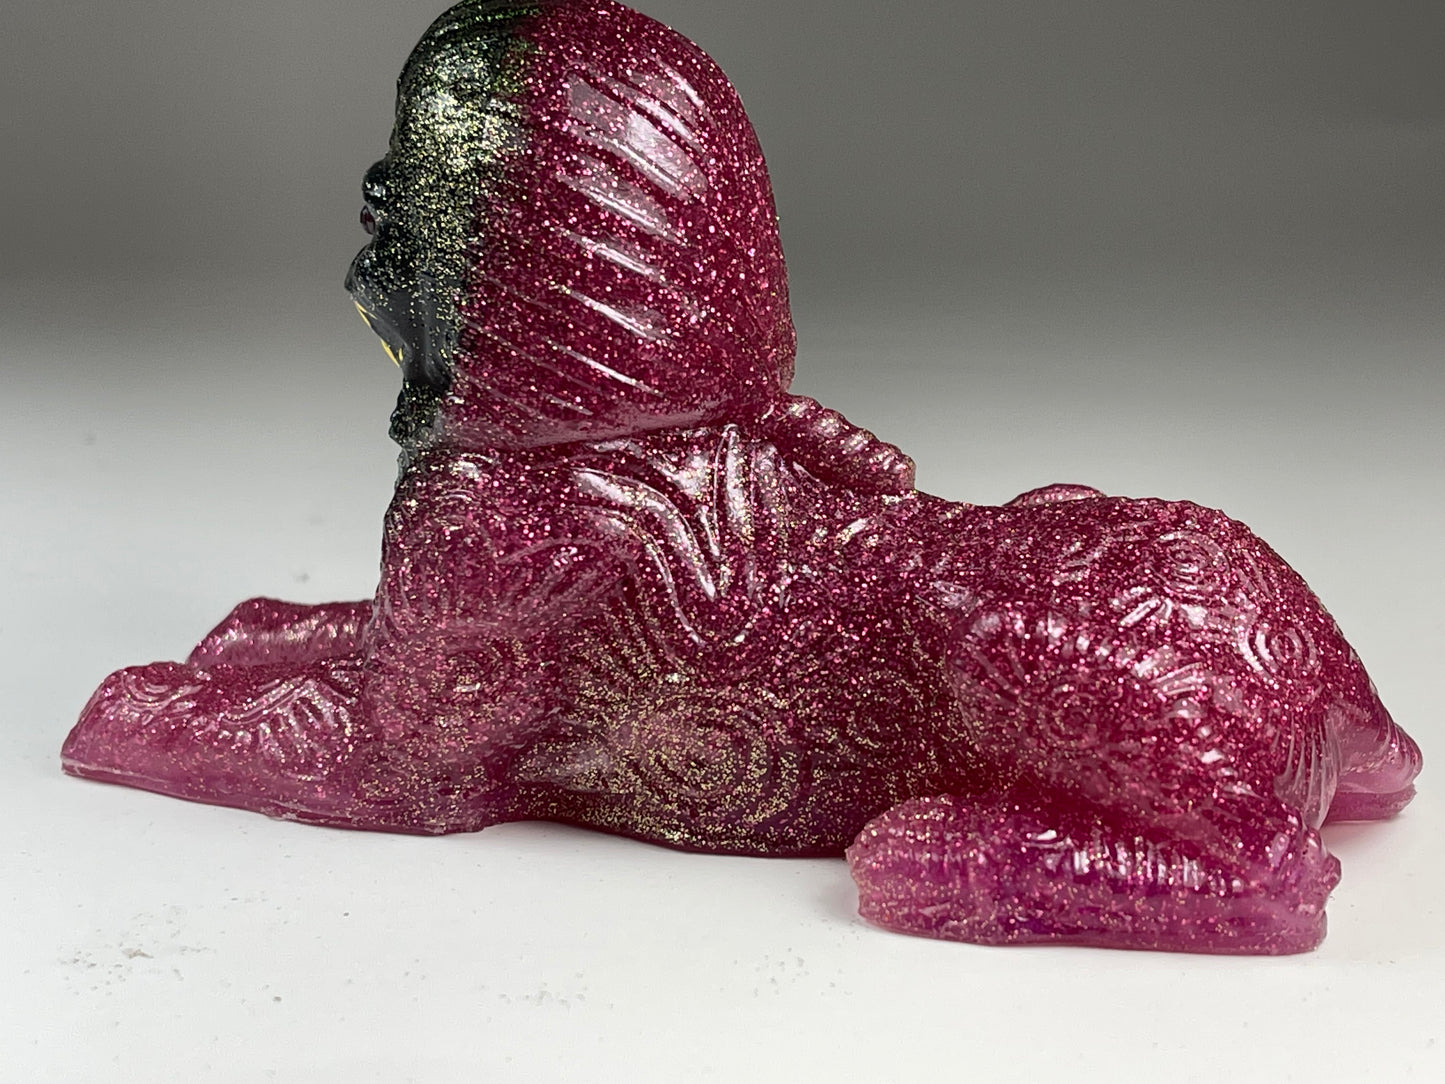 Sphinx Ape: Pink and Gold Dilemma